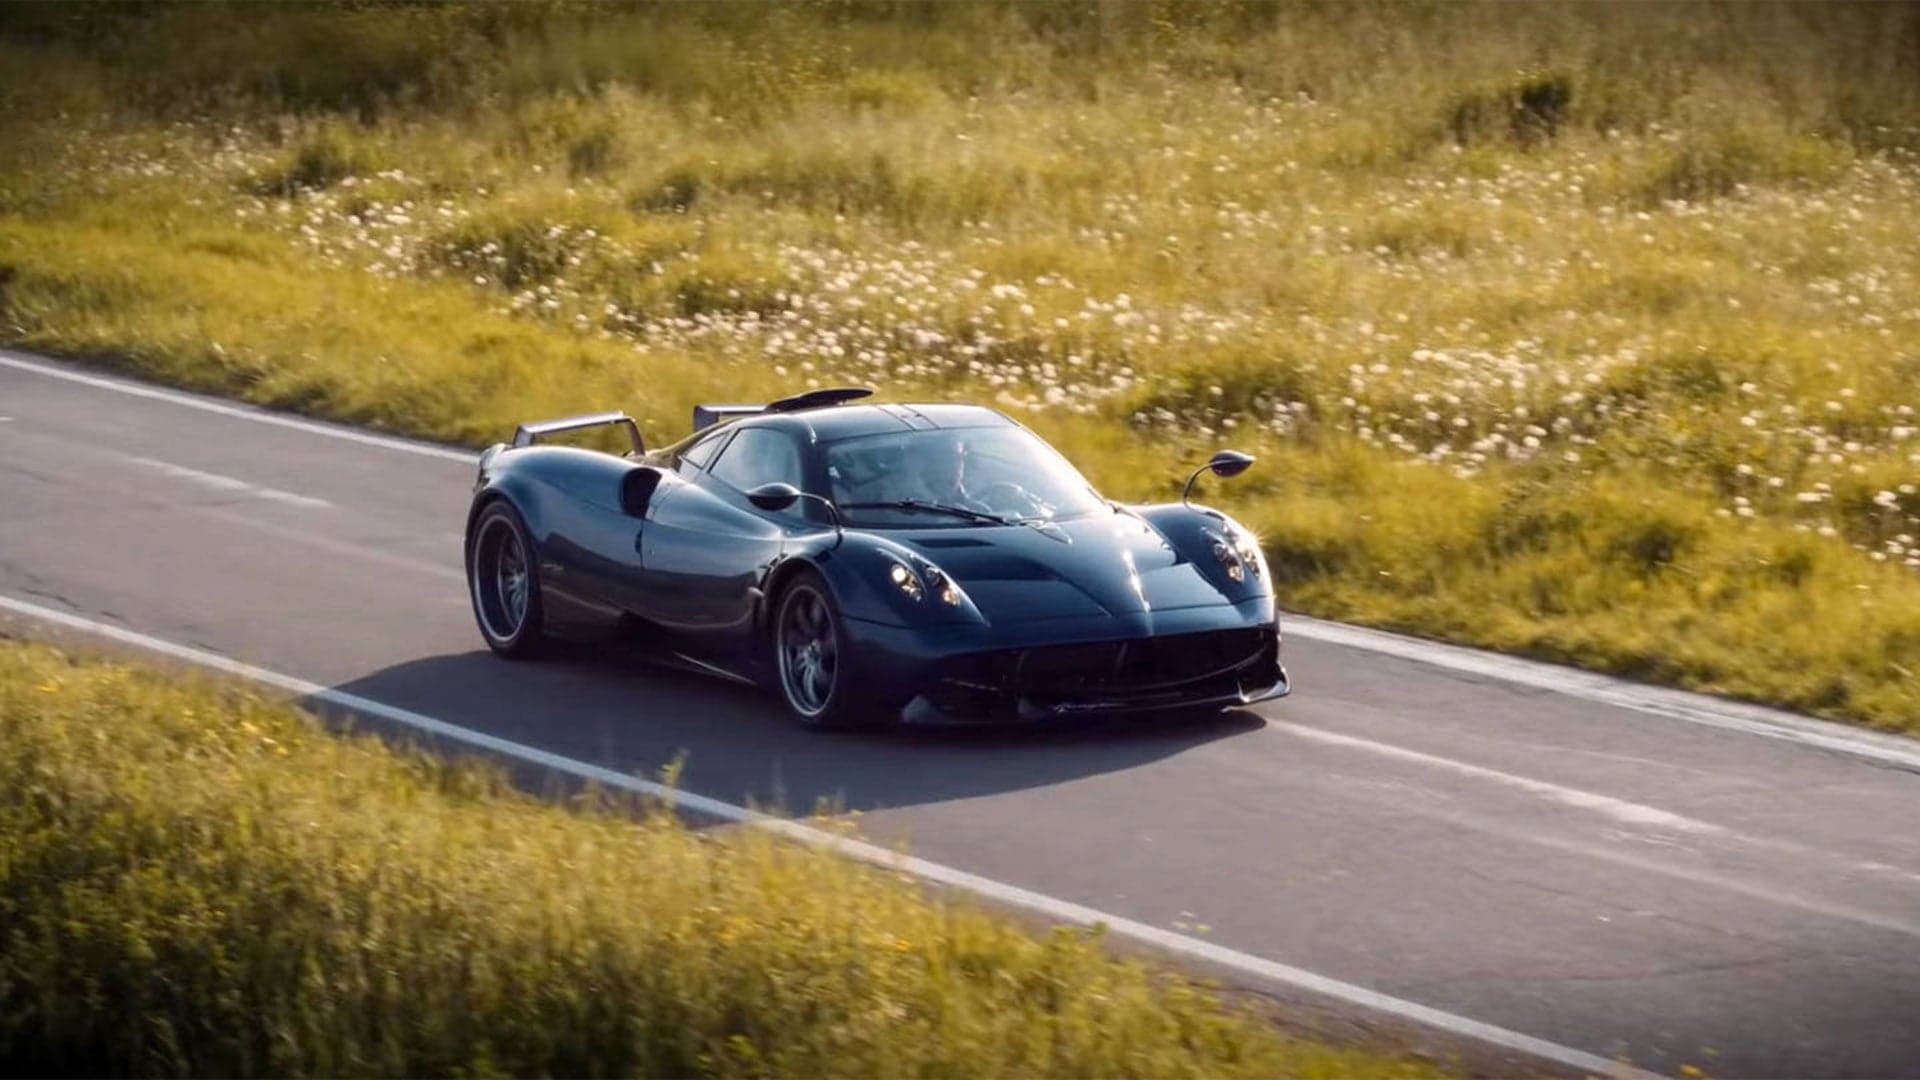 The World’s Only Pagani Huayra Pearl Just Wrecked